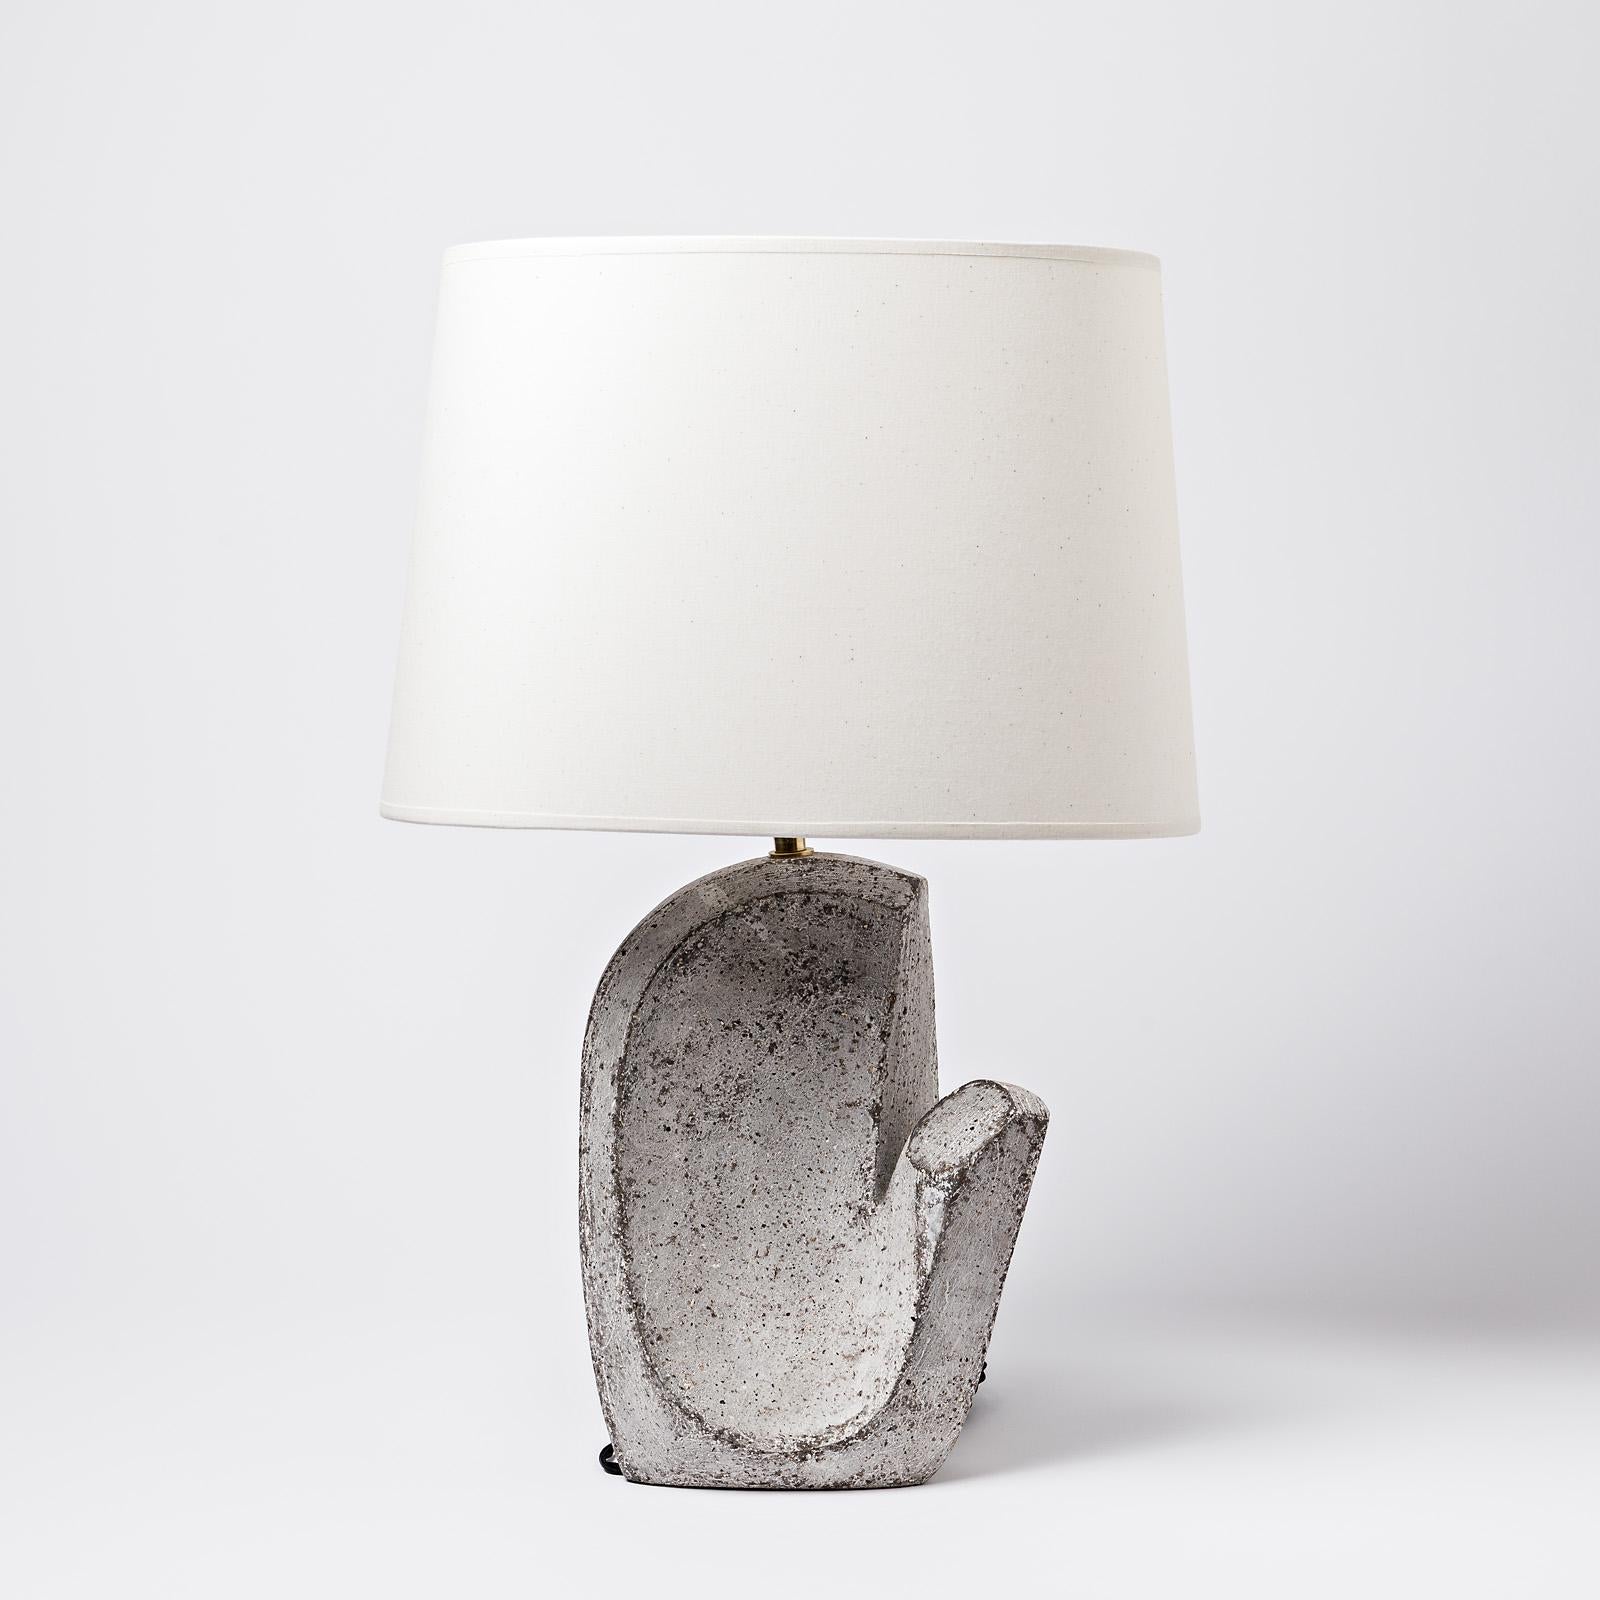 Beaux Arts Pair of Ceramic Table Lamps by Maarten Stuer, circa 2021